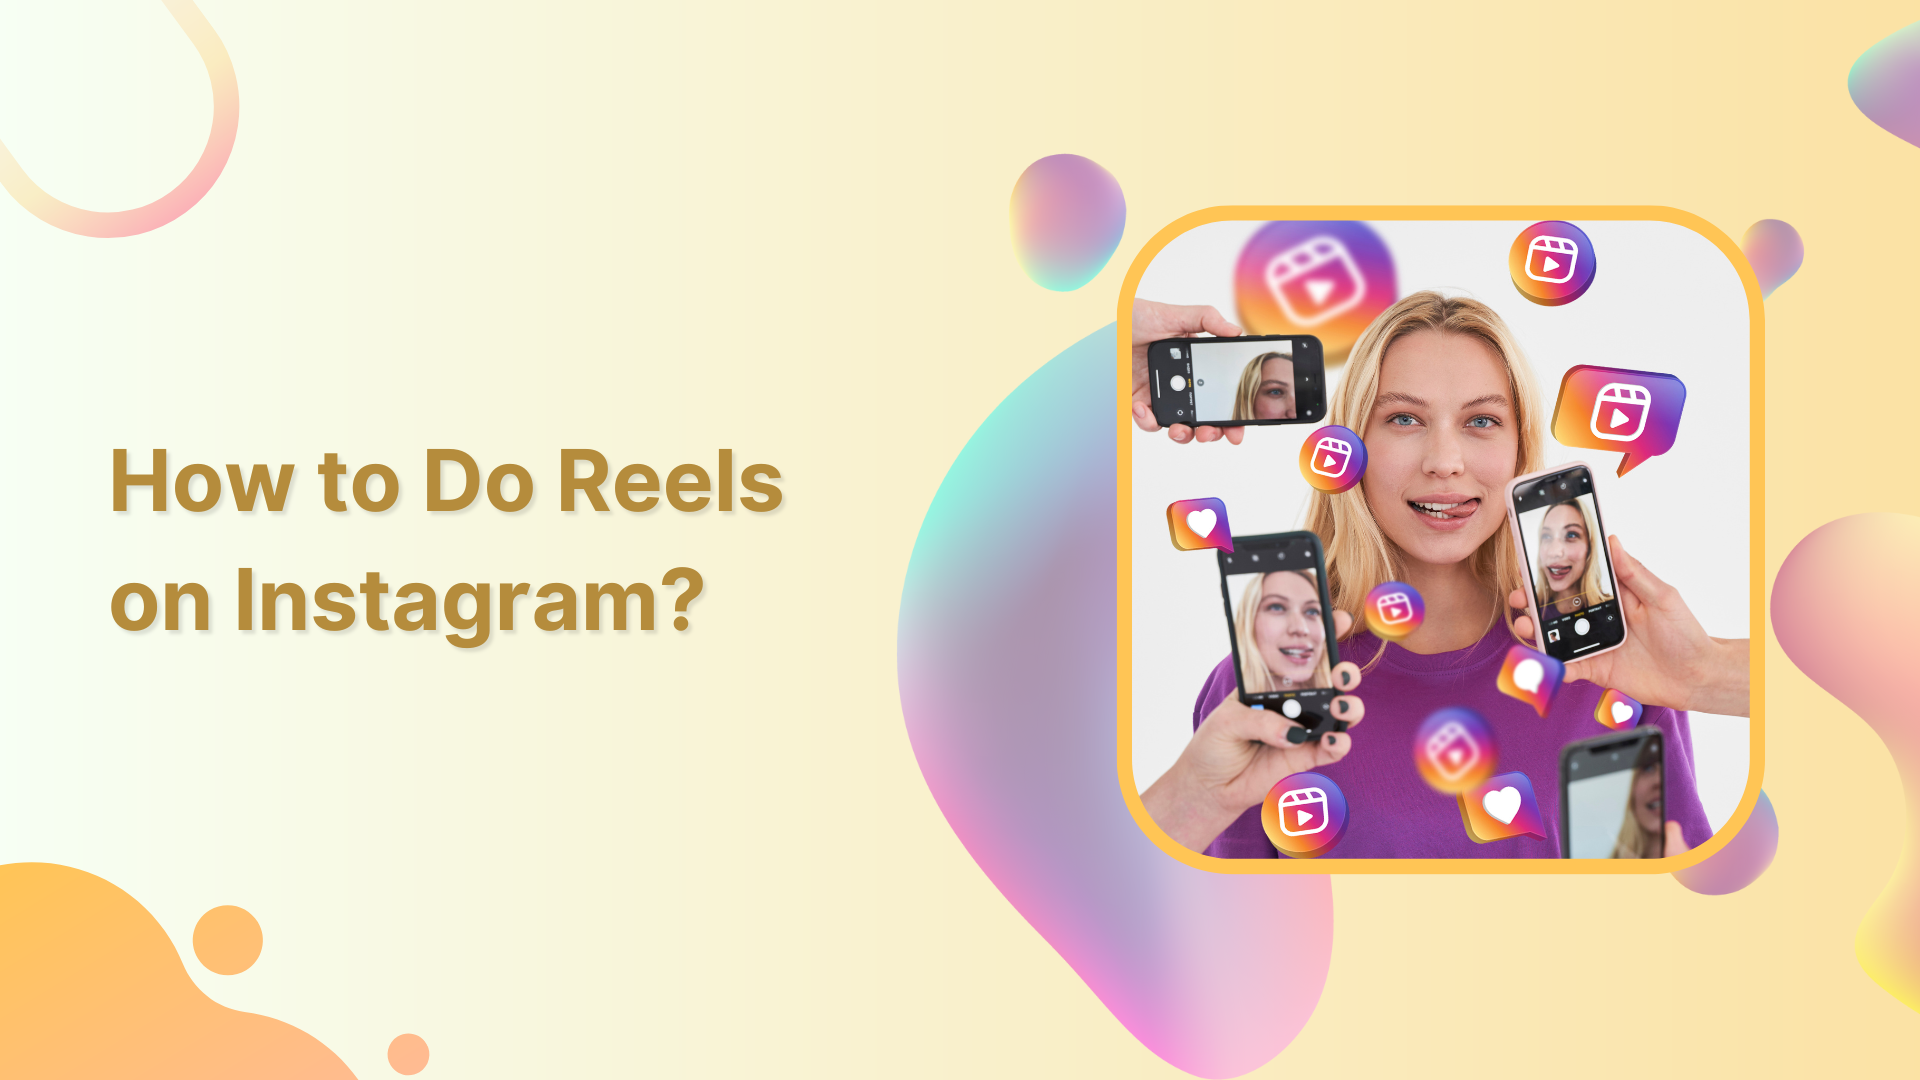 How to do reels on Instagram